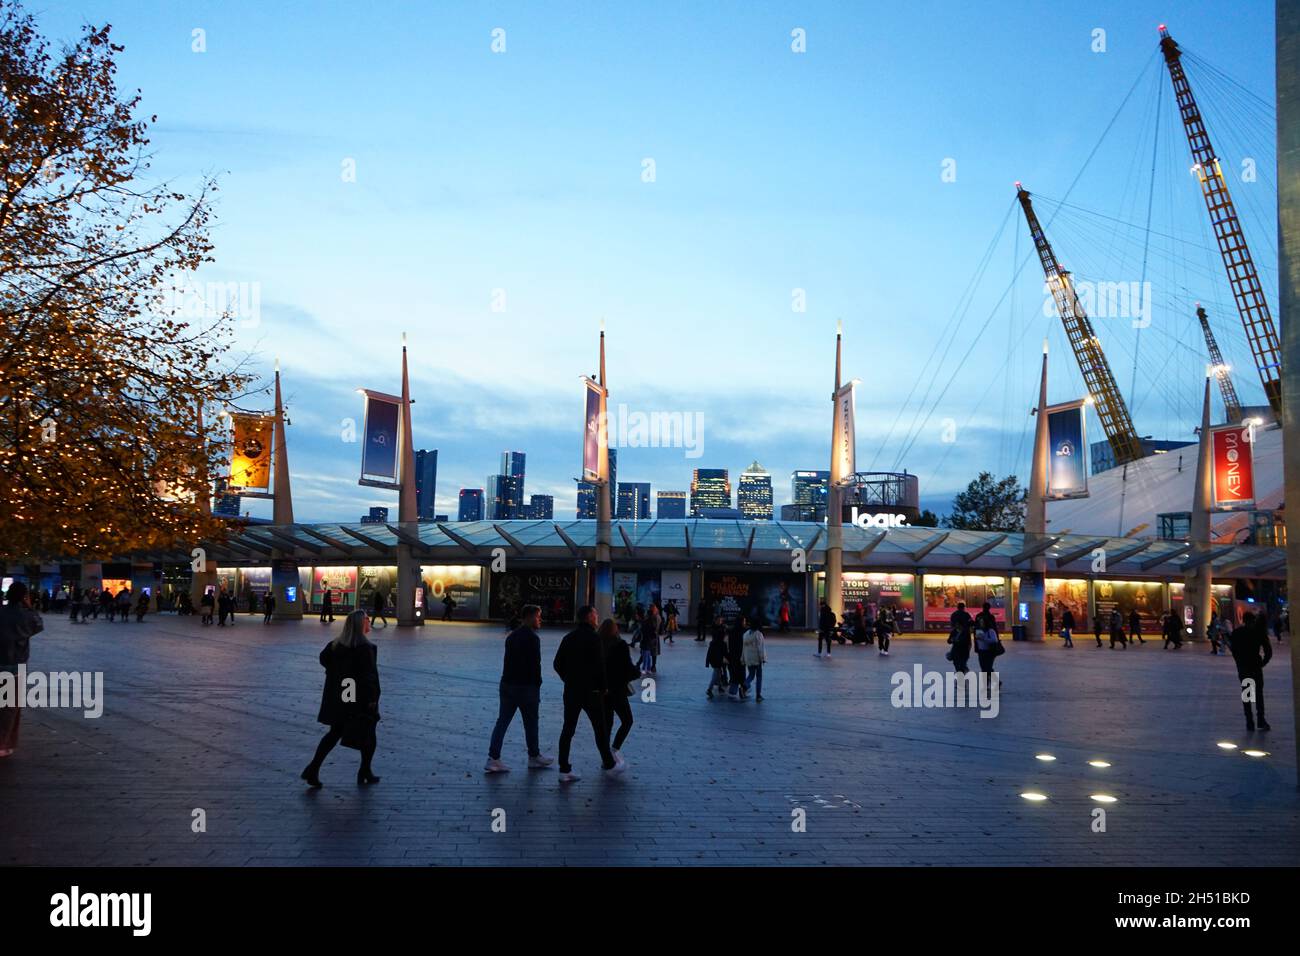 A sunset overview of the Peninsula Square at the O2 Arena, London, England, United Kingdom Stock Photo